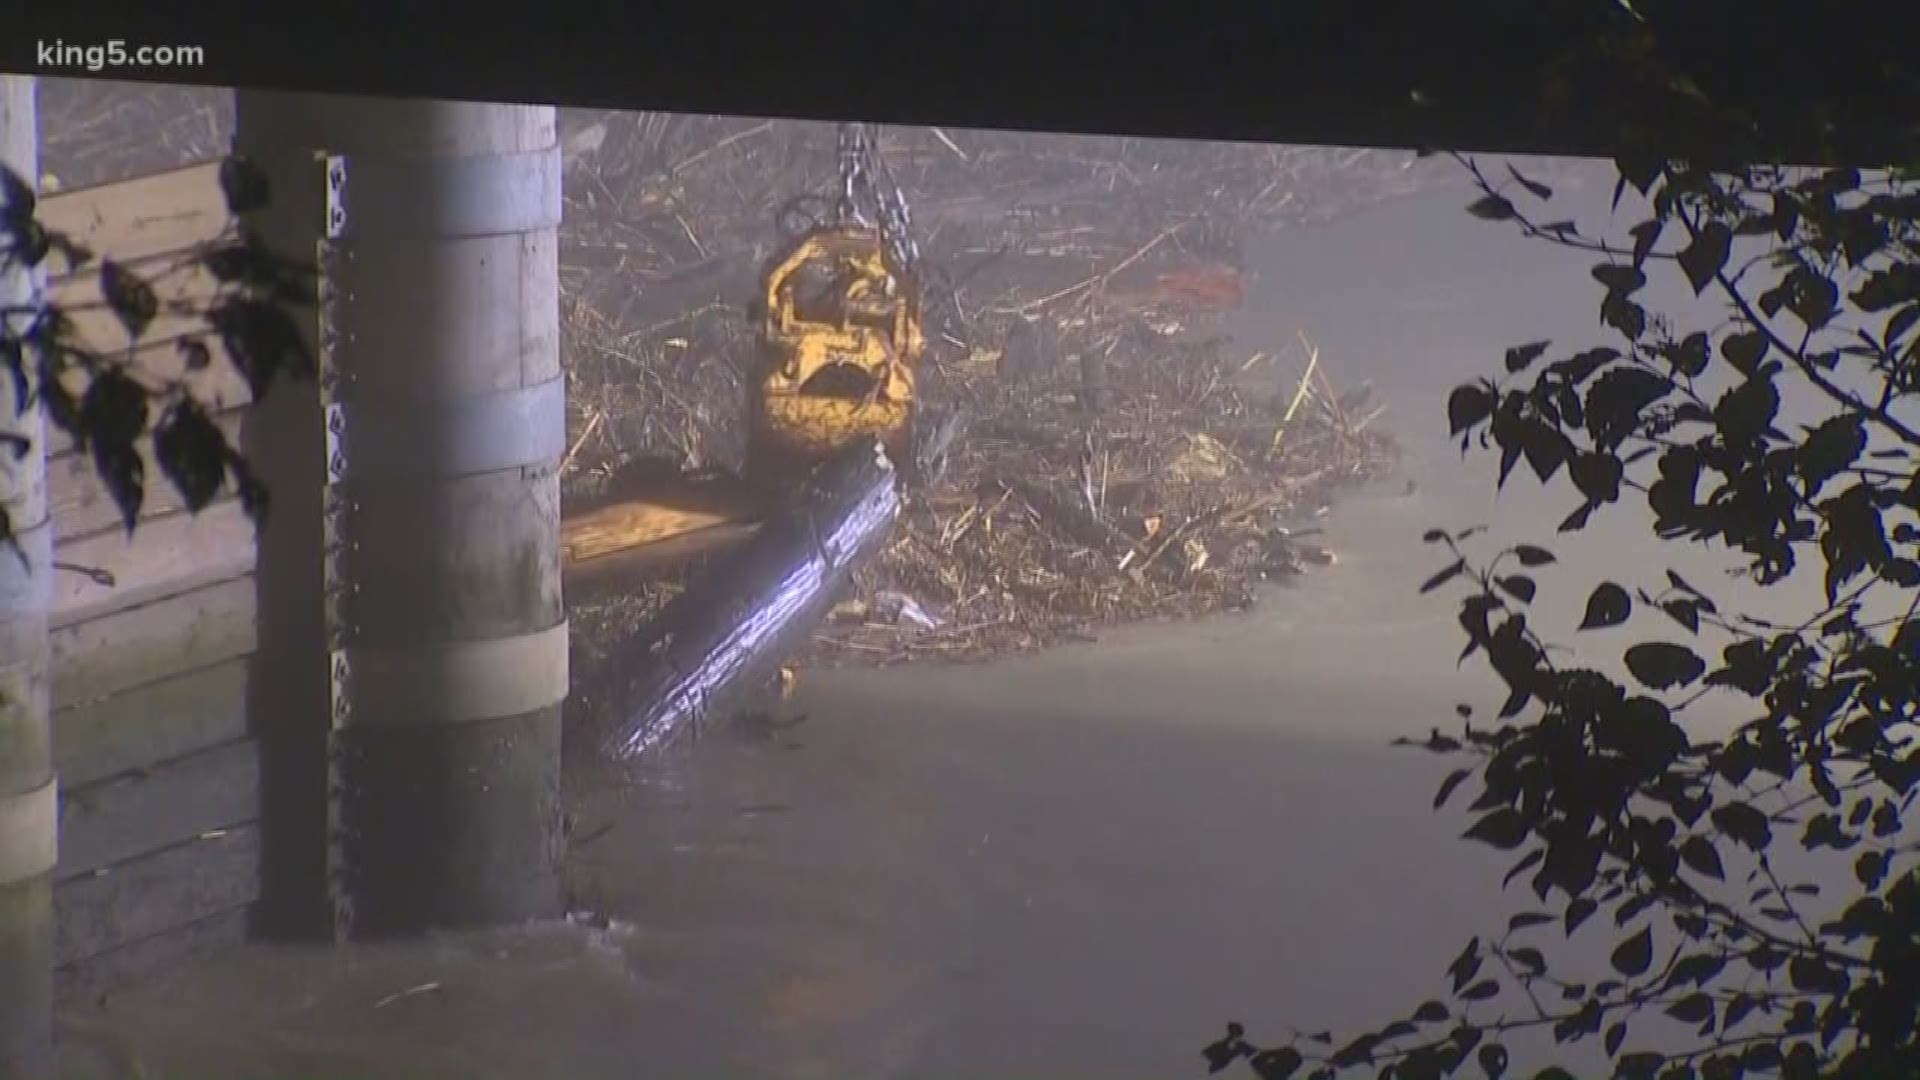 WSDOT said drivers should plan for delays through the Wednesday morning commute as their crews continue to clean up debris caused by a log jam.